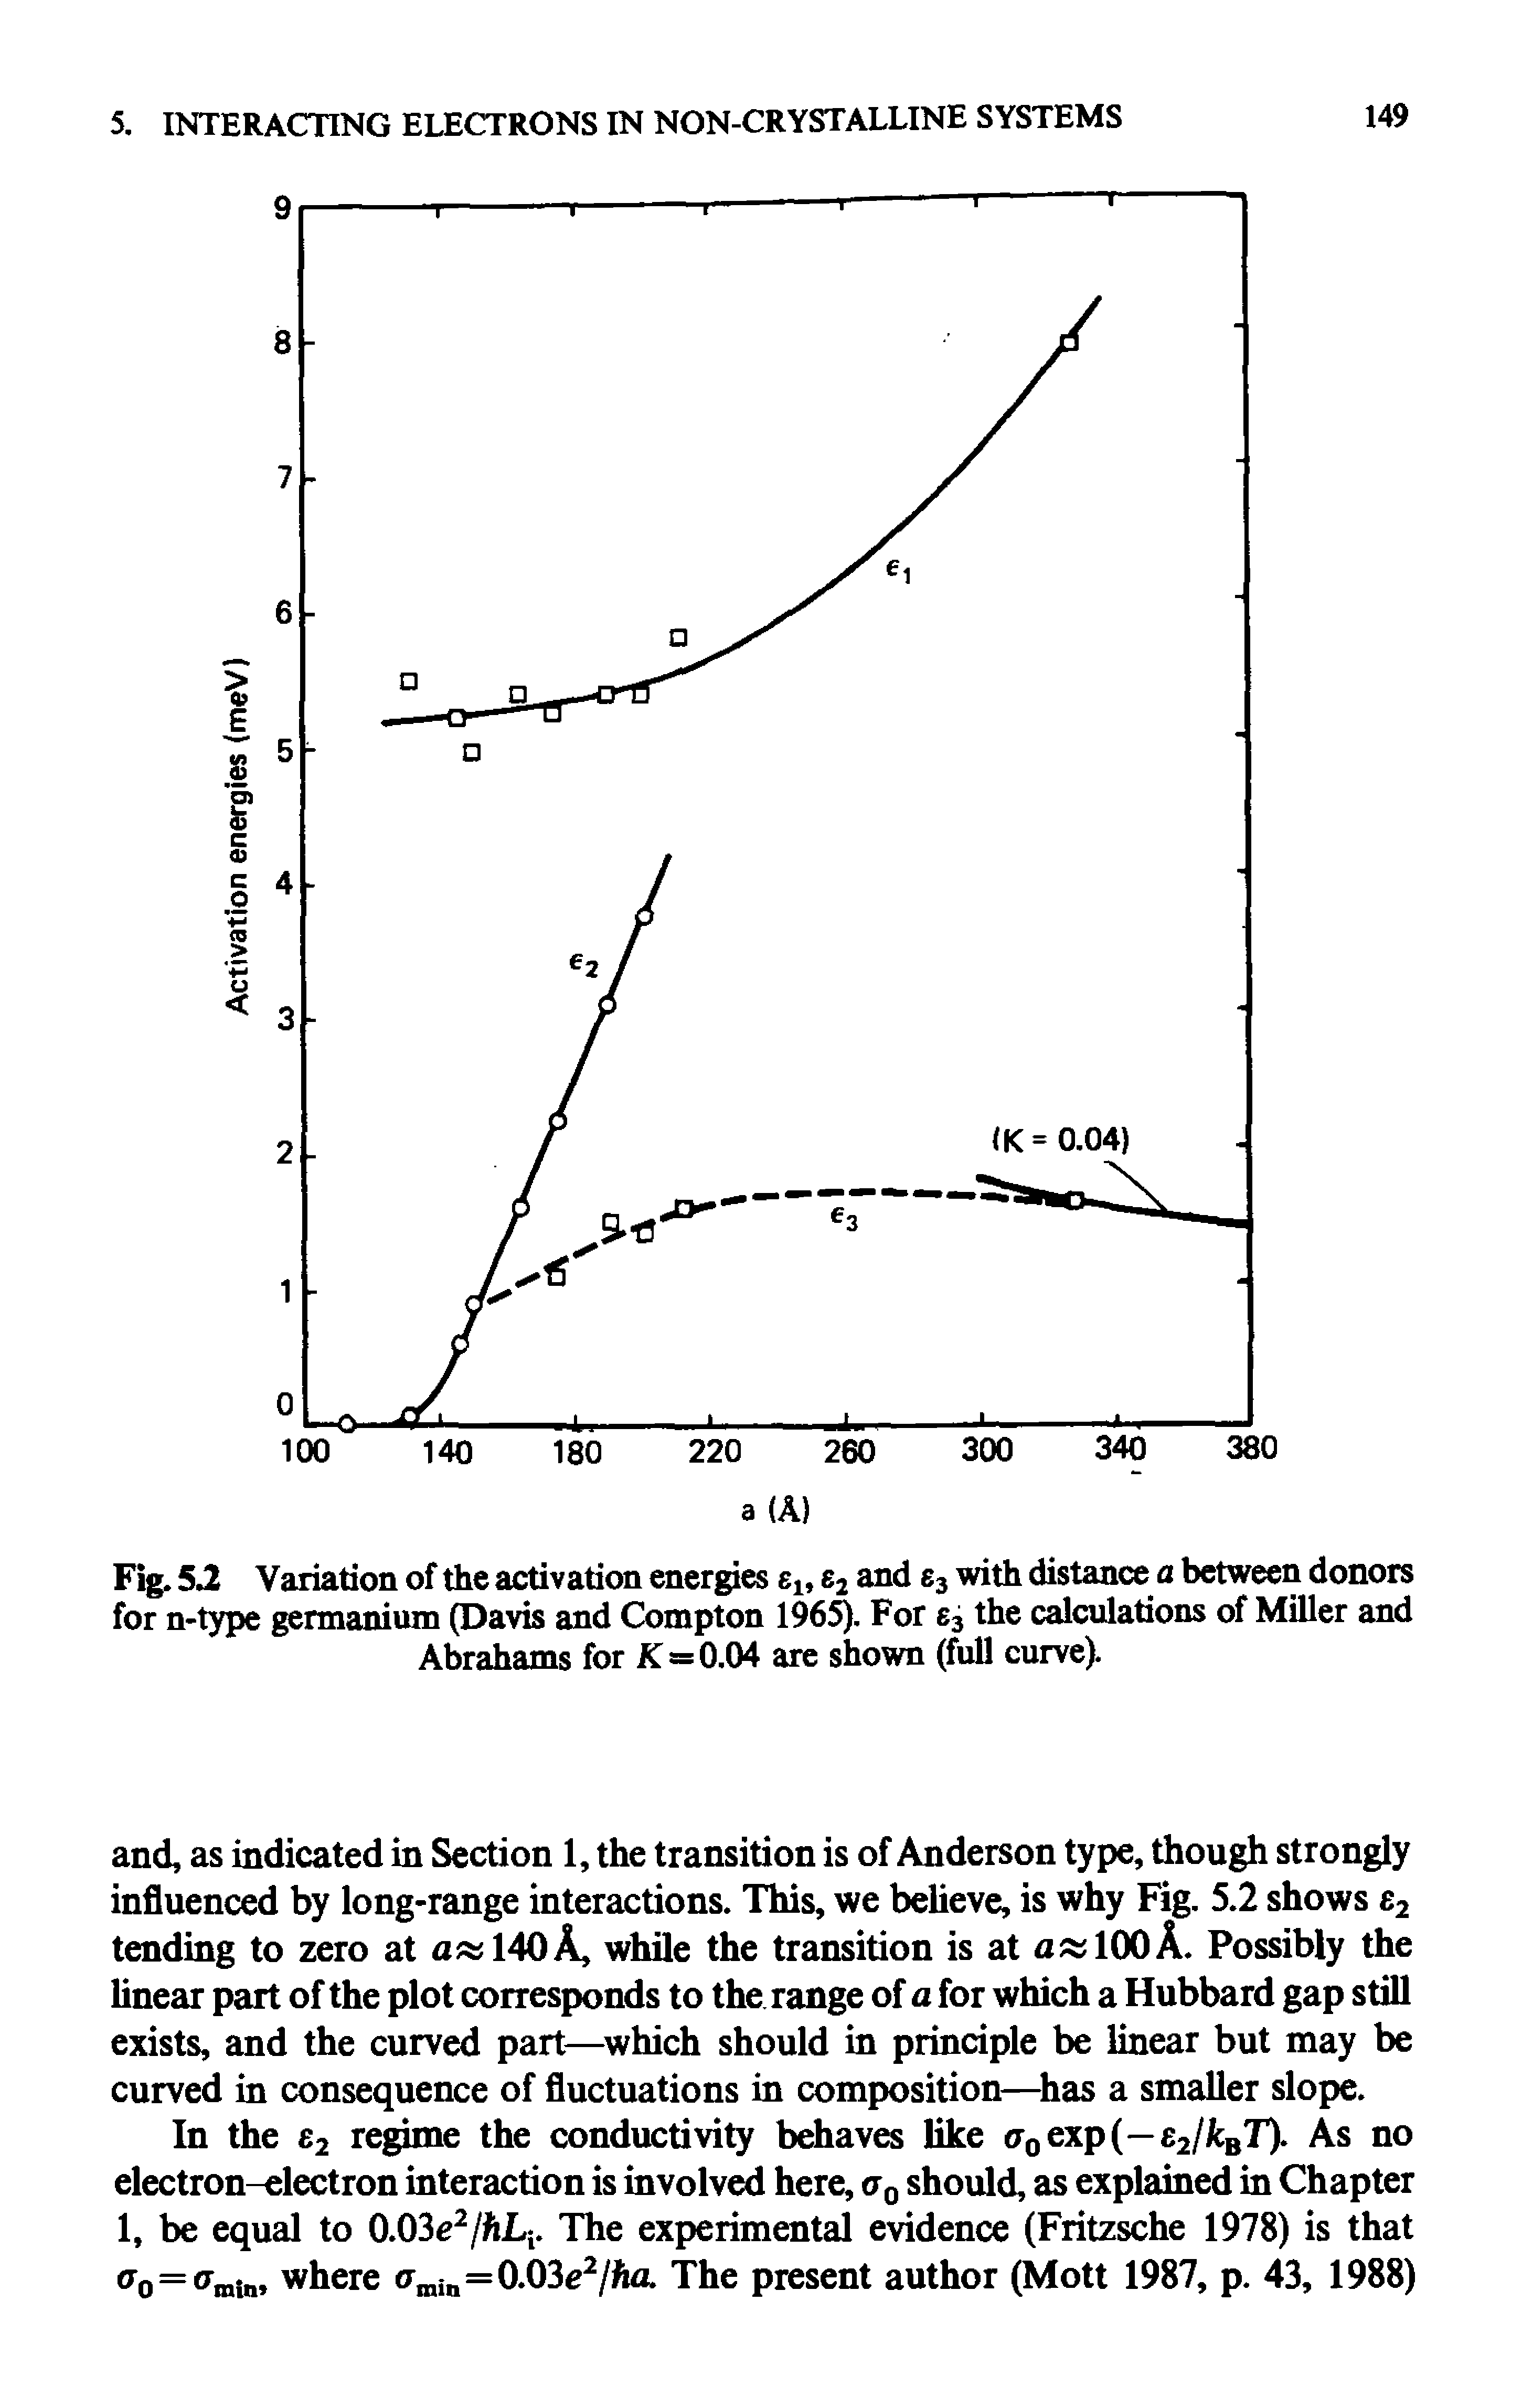 Fig. 5.2 Variation of the activation energies el9 e2 and e3 with distance a between donors for n-type germanium (Davis and Compton 1965). For e3 the calculations of Miller and Abrahams for K—0.04 are shown (full curve).